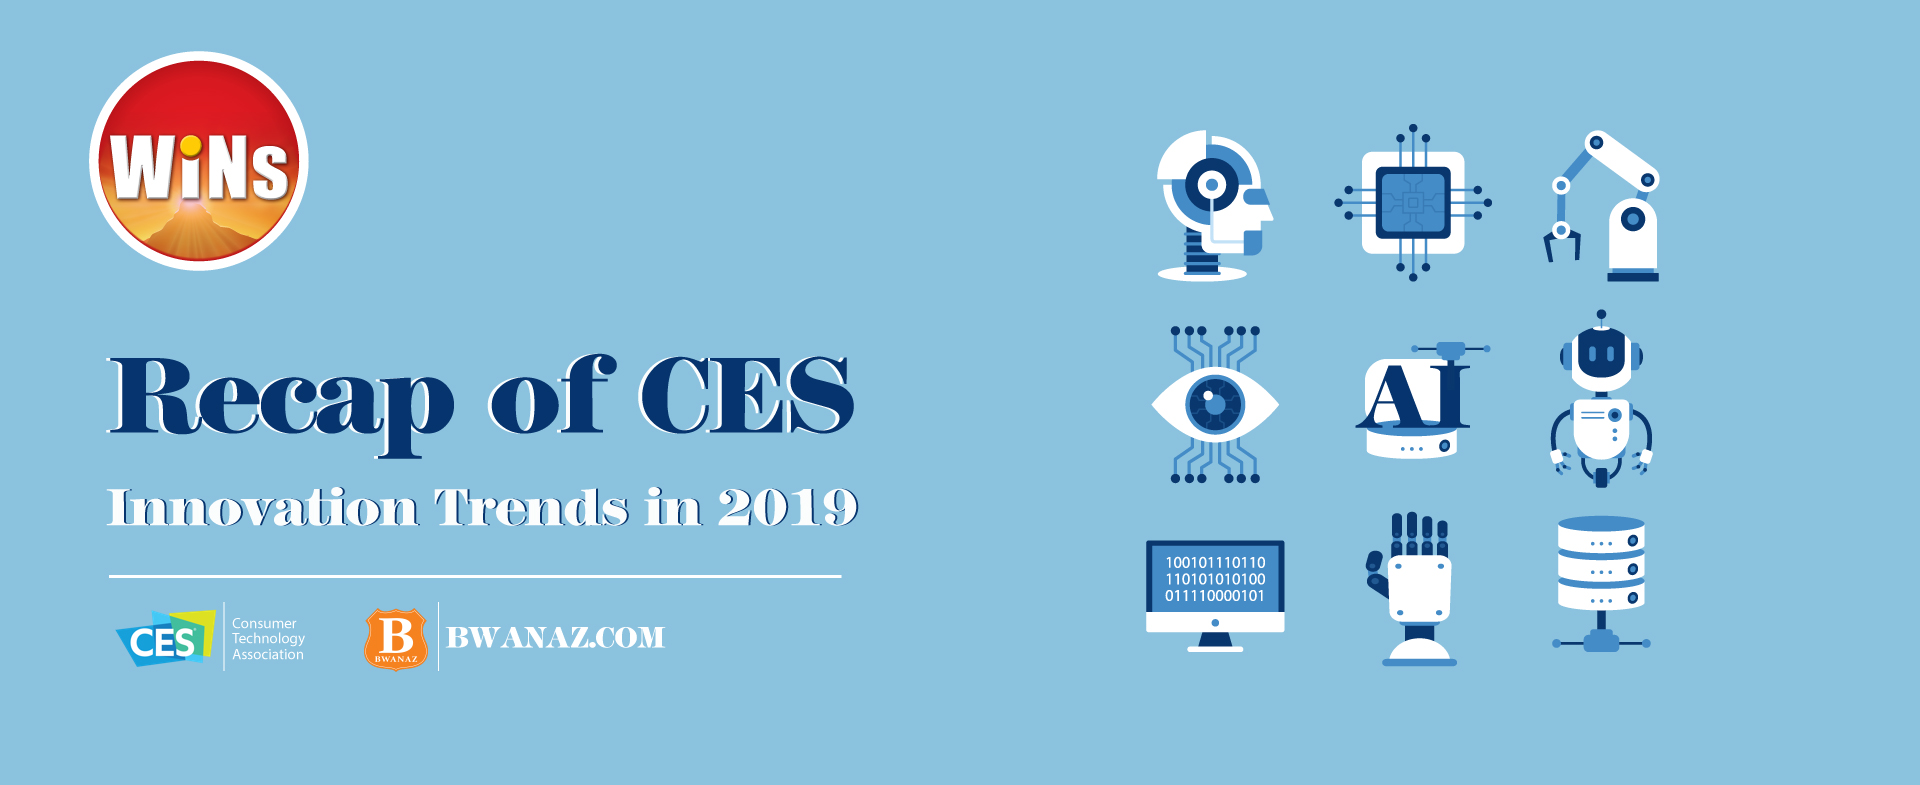 Recap of CES: Innovation Trends in 2019